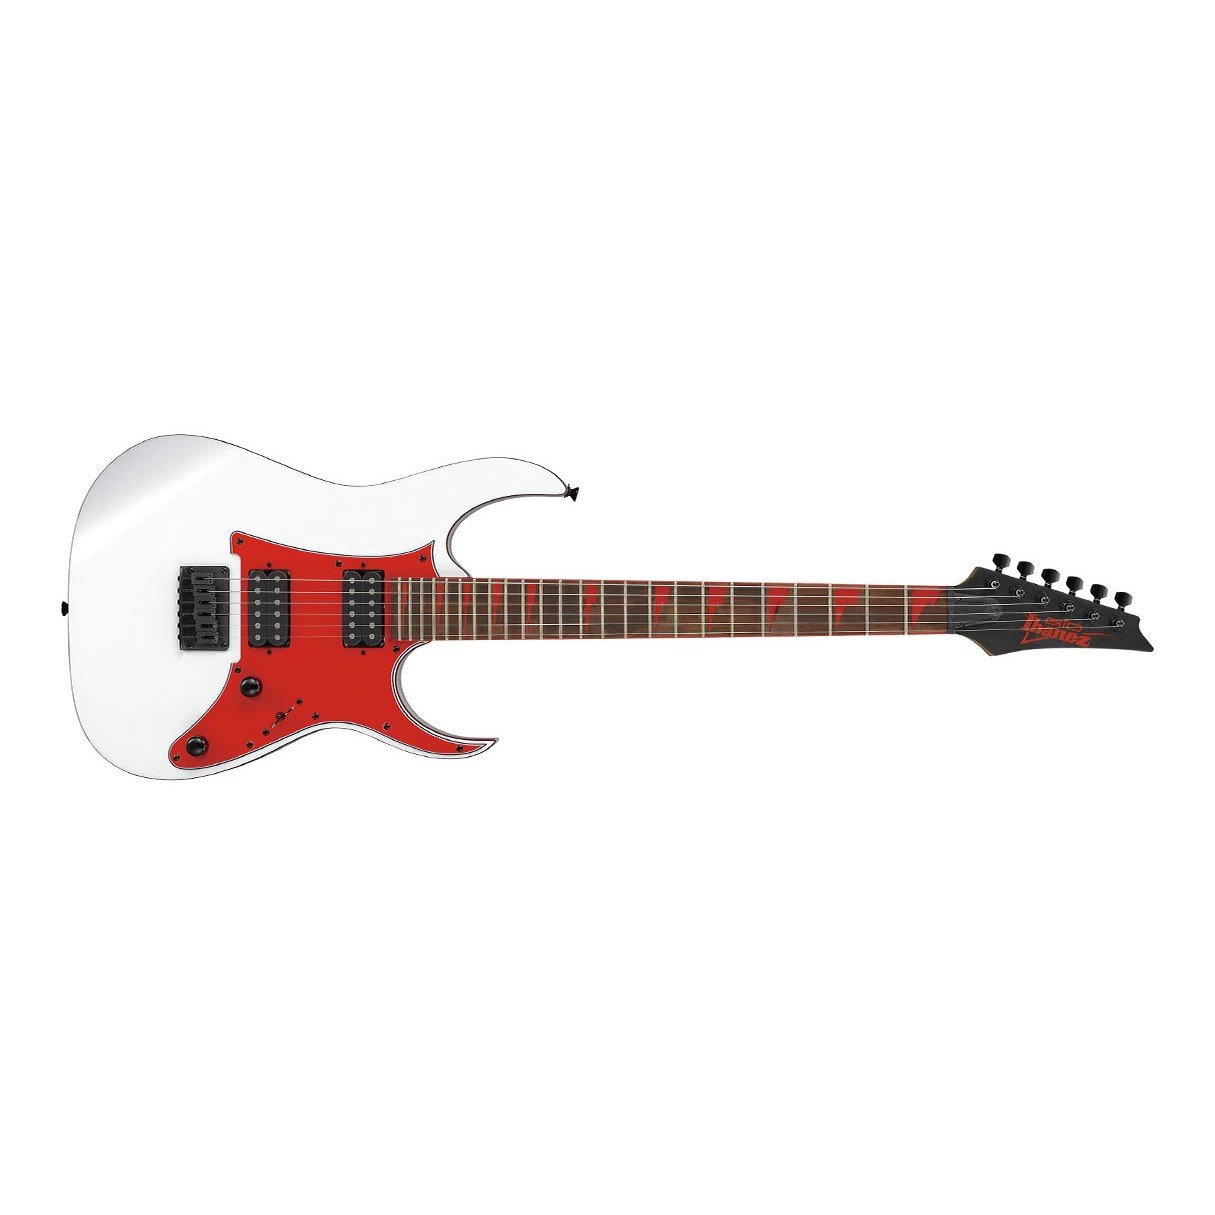 Ibanez GRG131DX-WH Gio Series Electric Guitar-White & Red-Music World Academy